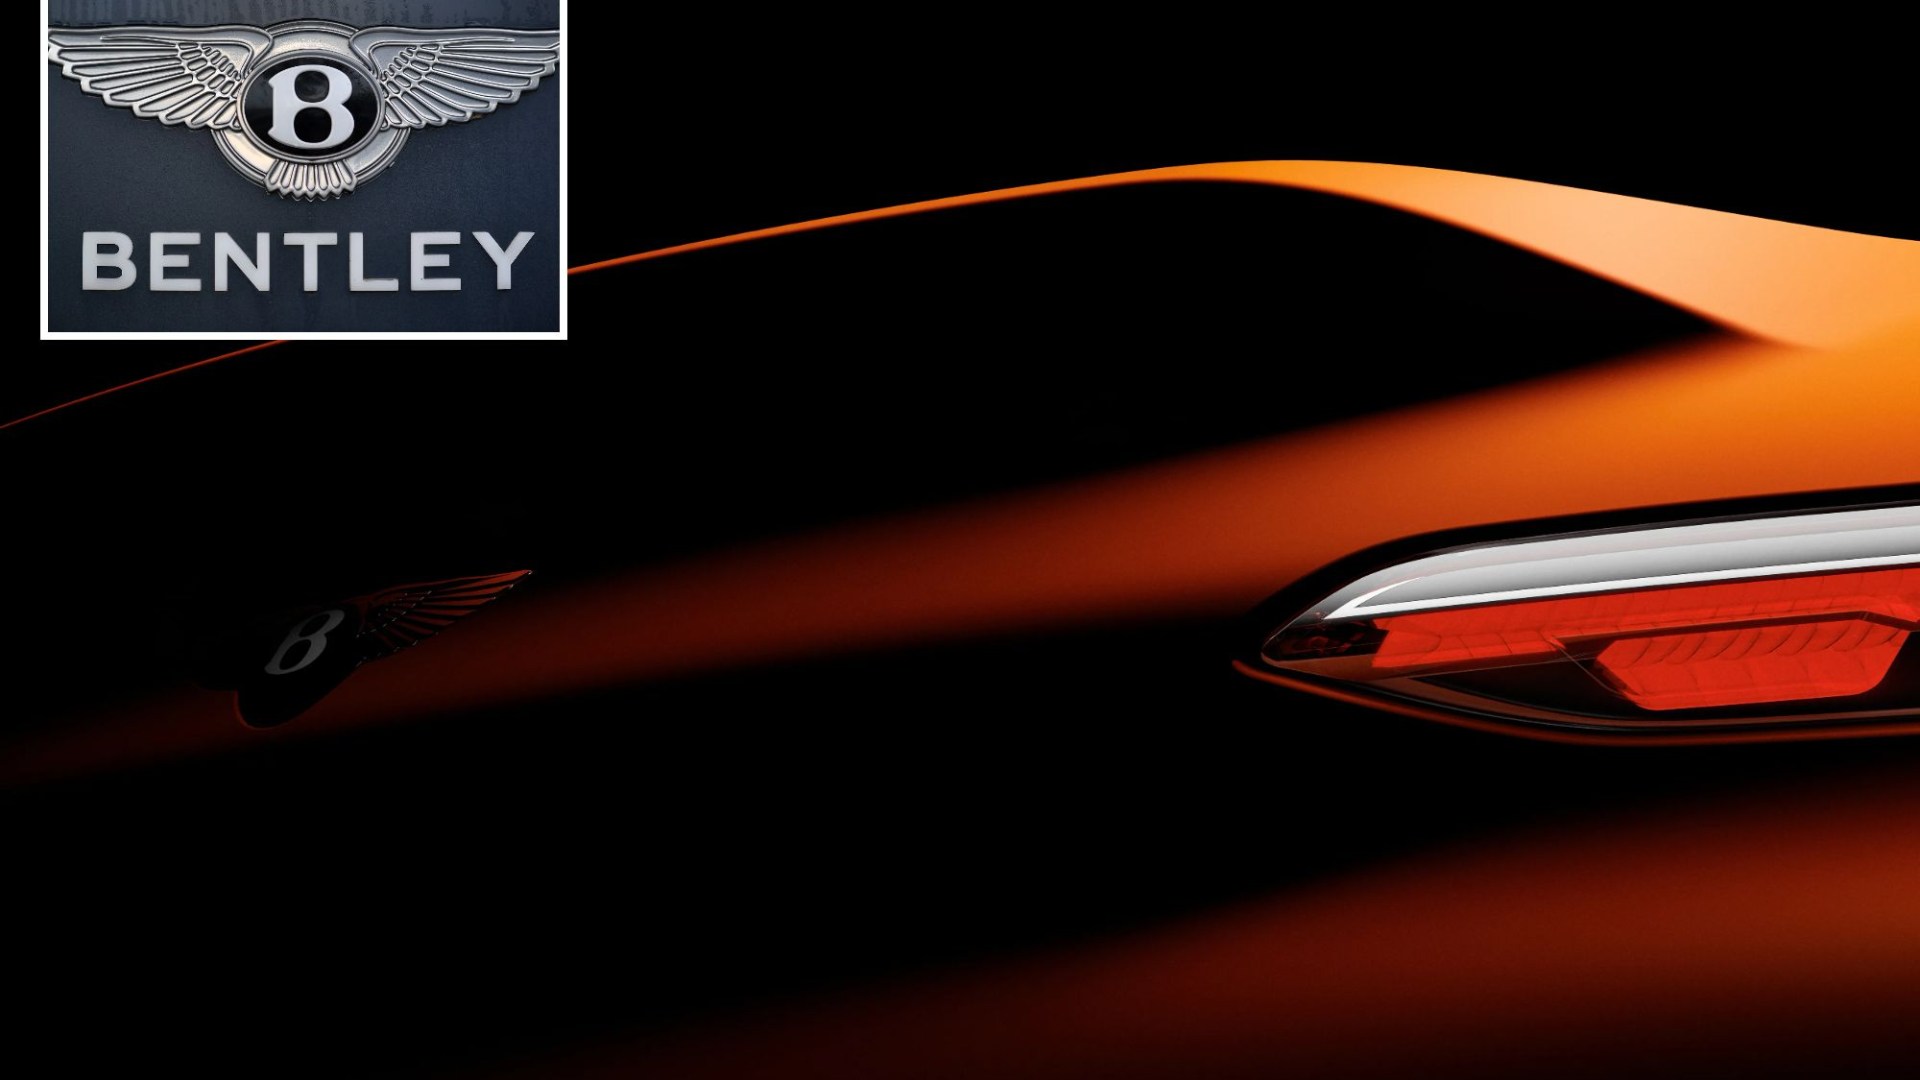 Bentley to unveil their most powerful car in brands history in a matter of days before switch to hybrids & EVs [Video]